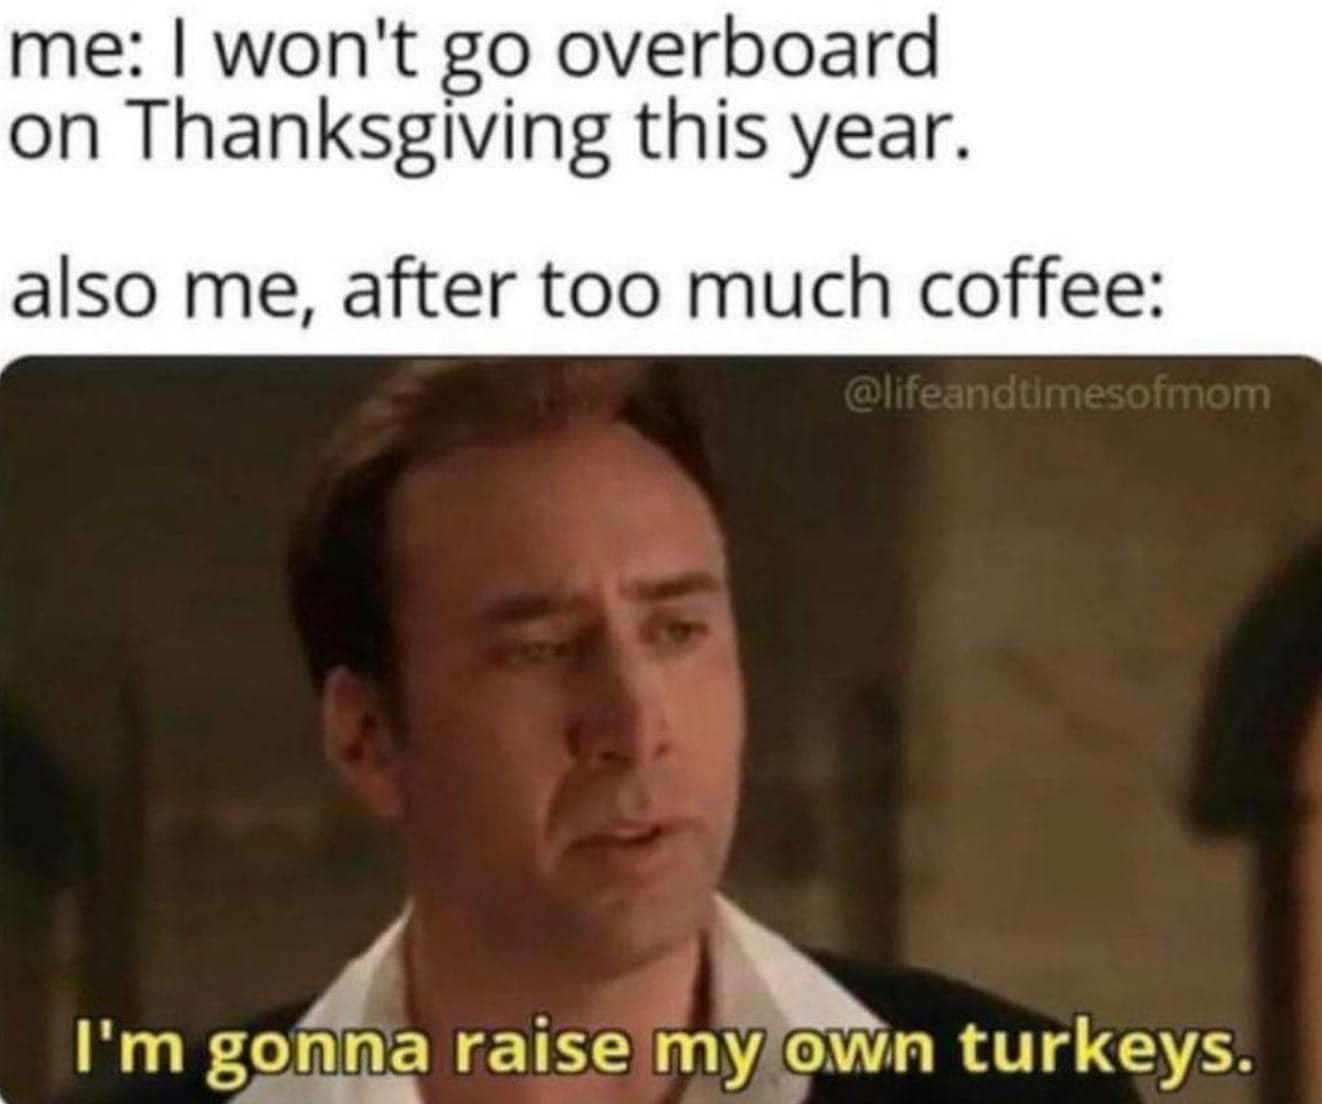 May be an image of 1 person and text that says 'me: I won't go overboard on Thanksgiving this year. also me, after too much coffee: I'm gonna raise my own turkeys.'